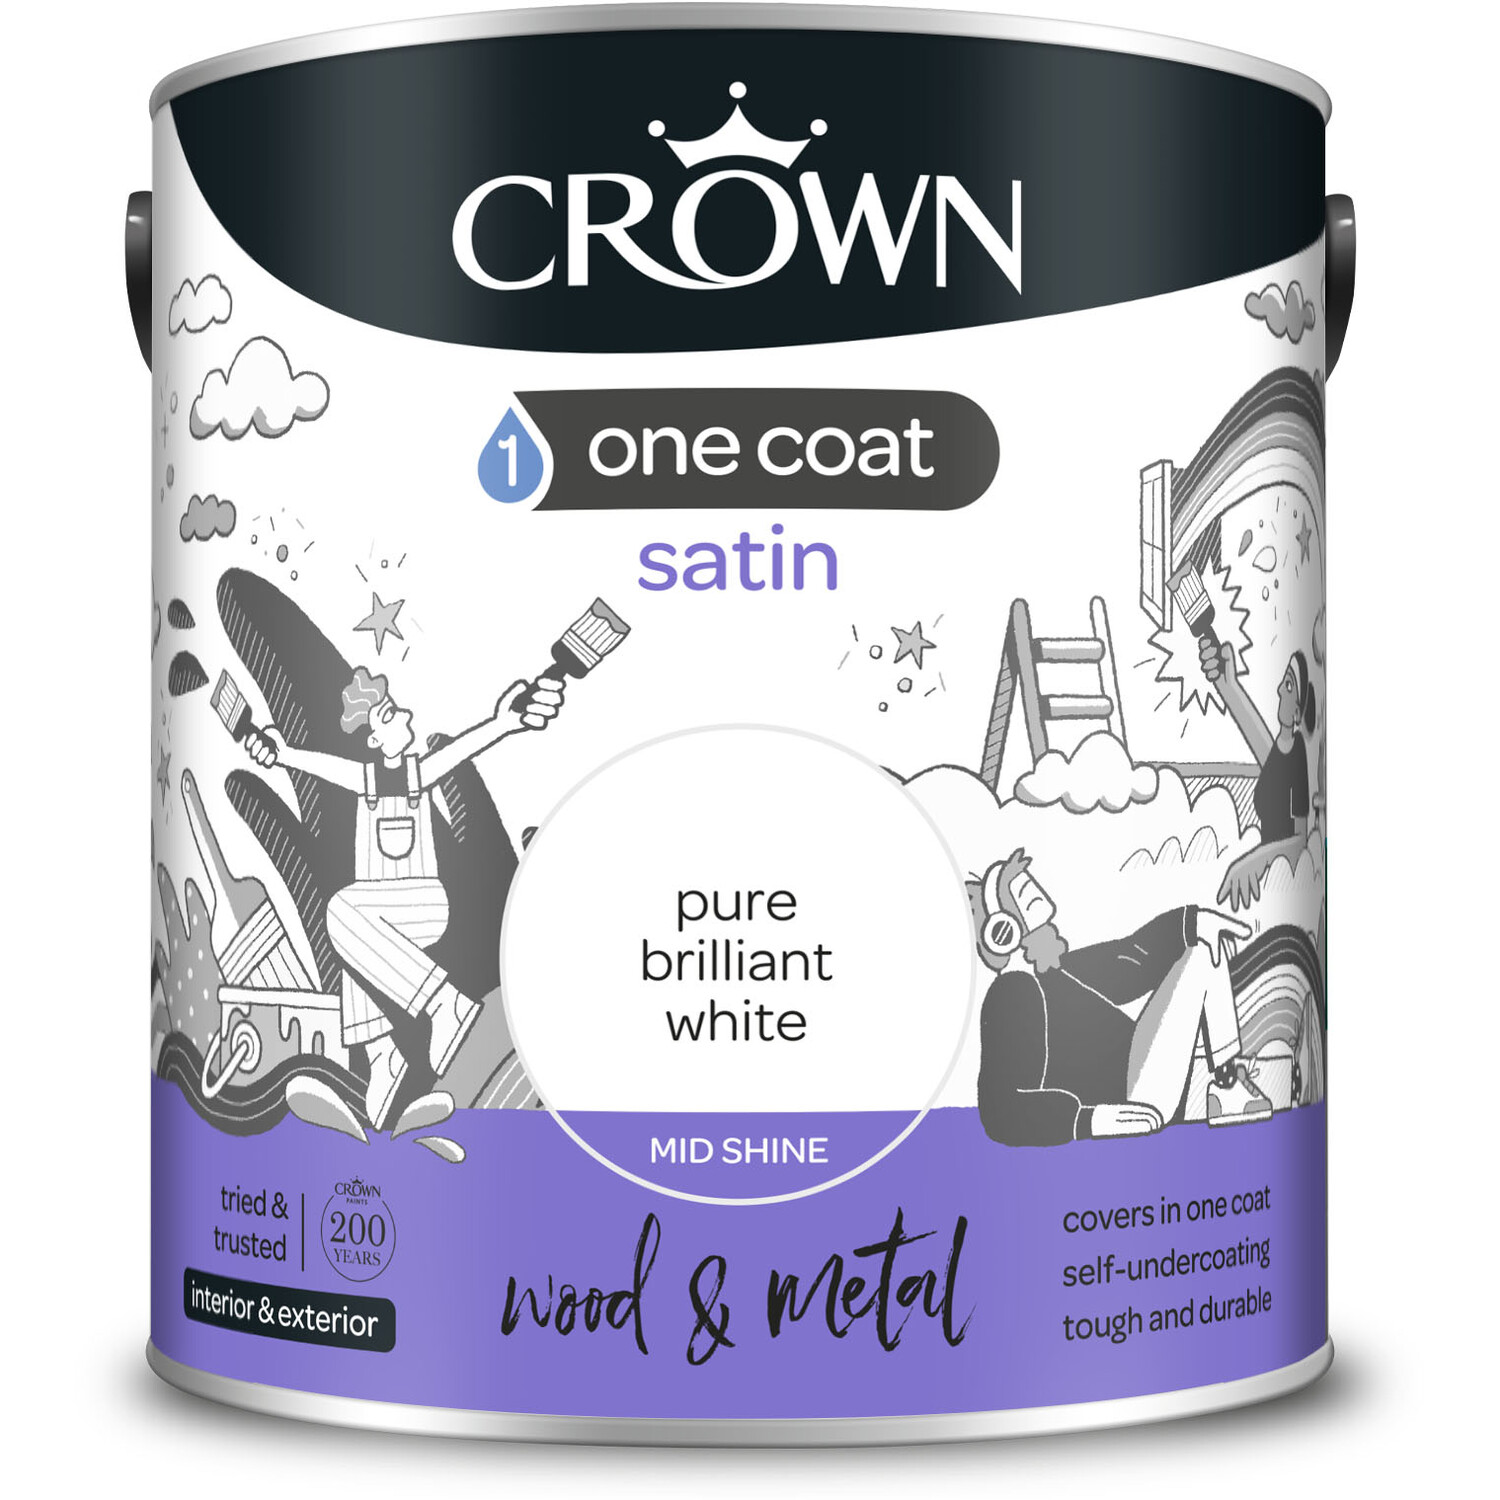 Crown Wood and Metal One Coat Satin - Pure Brilliant White Image 2